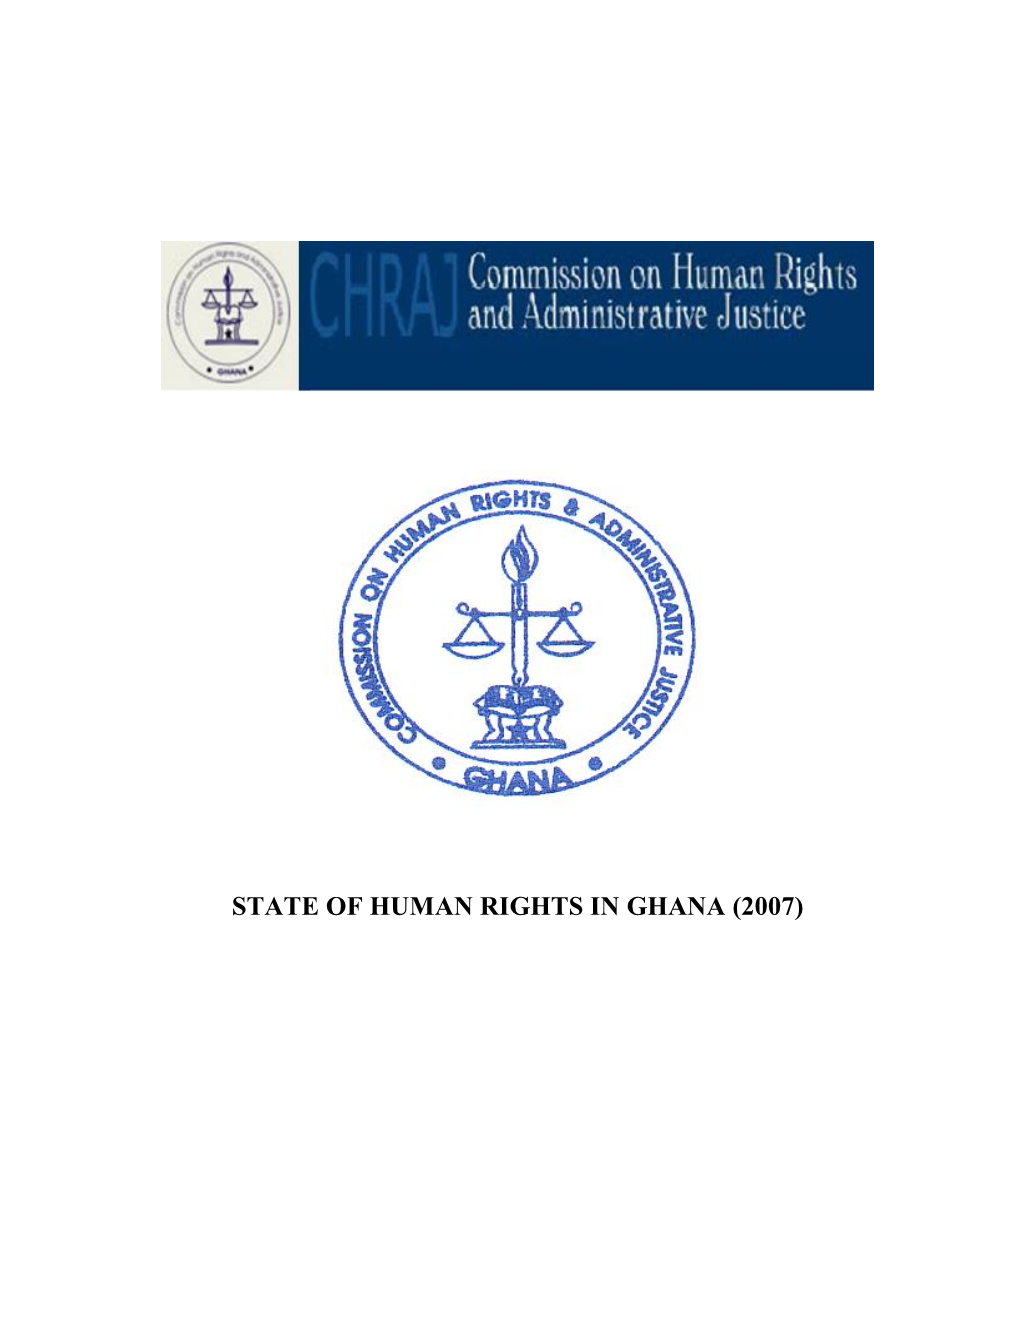 State of Human Rights in Ghana (2007)